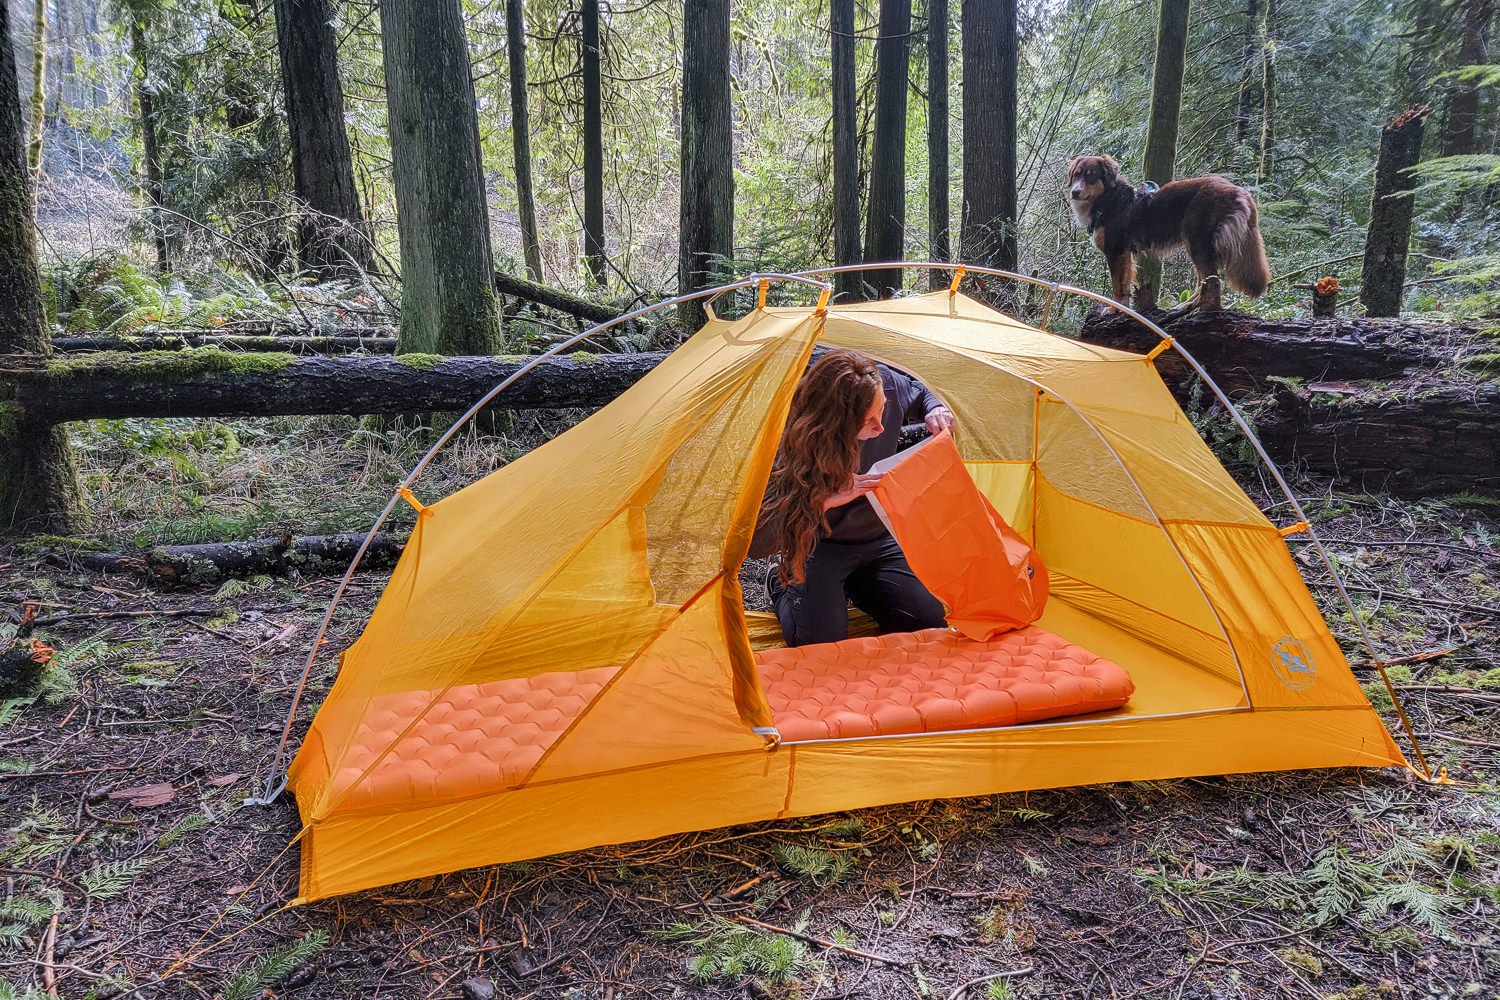 A hiker inside a tent inflating the Big Agnes Zoom UL with a pump sack - its in a forest campsite and theres a dog in the background